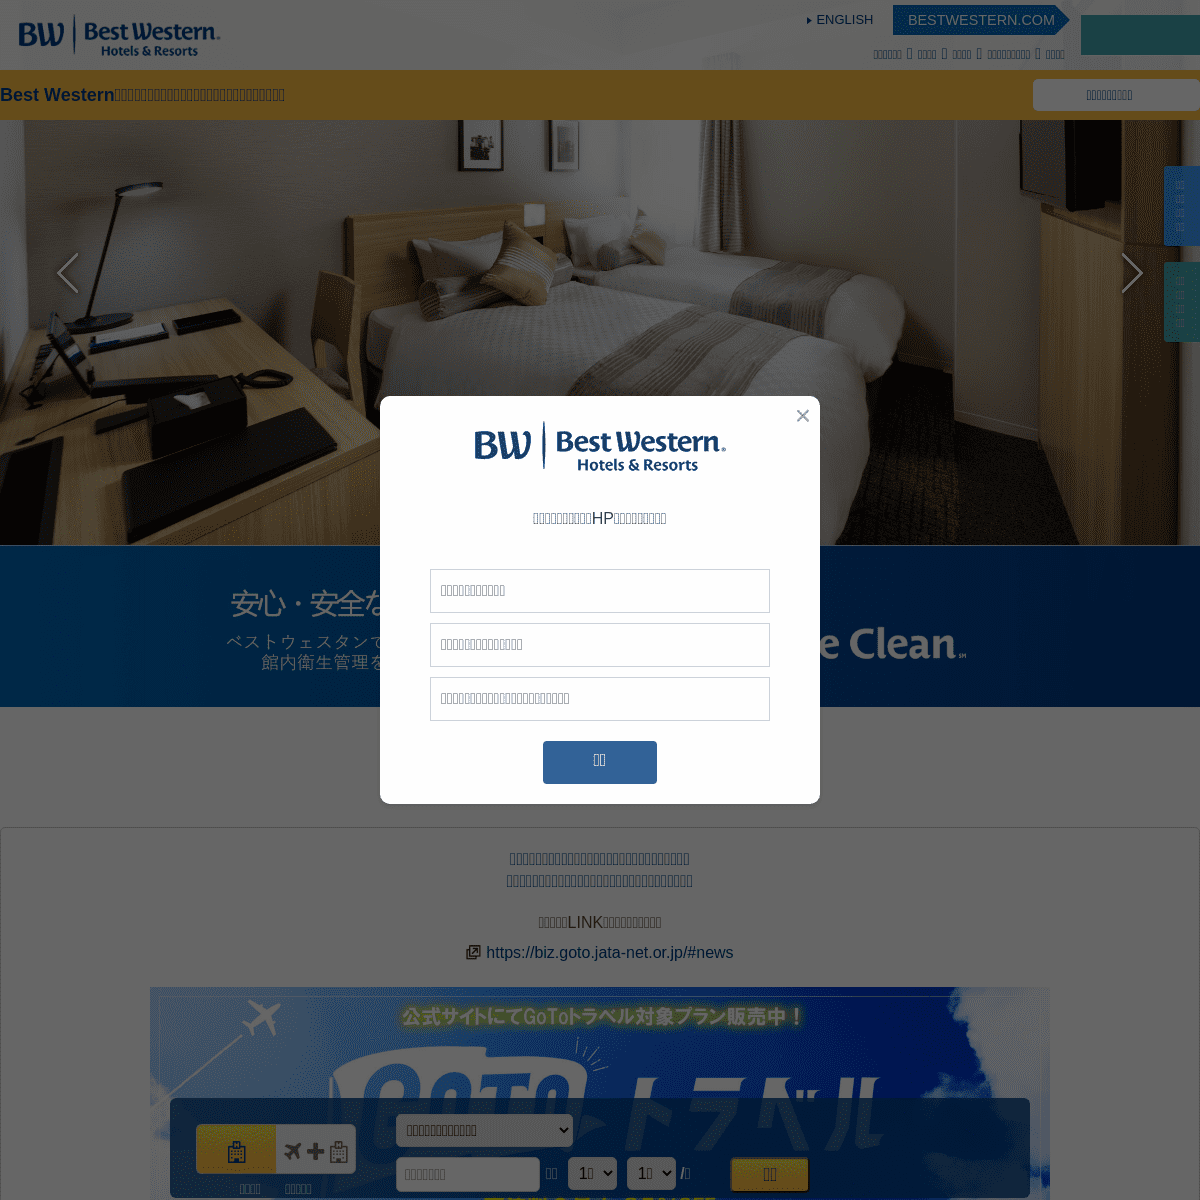 A complete backup of https://bwhotels.jp